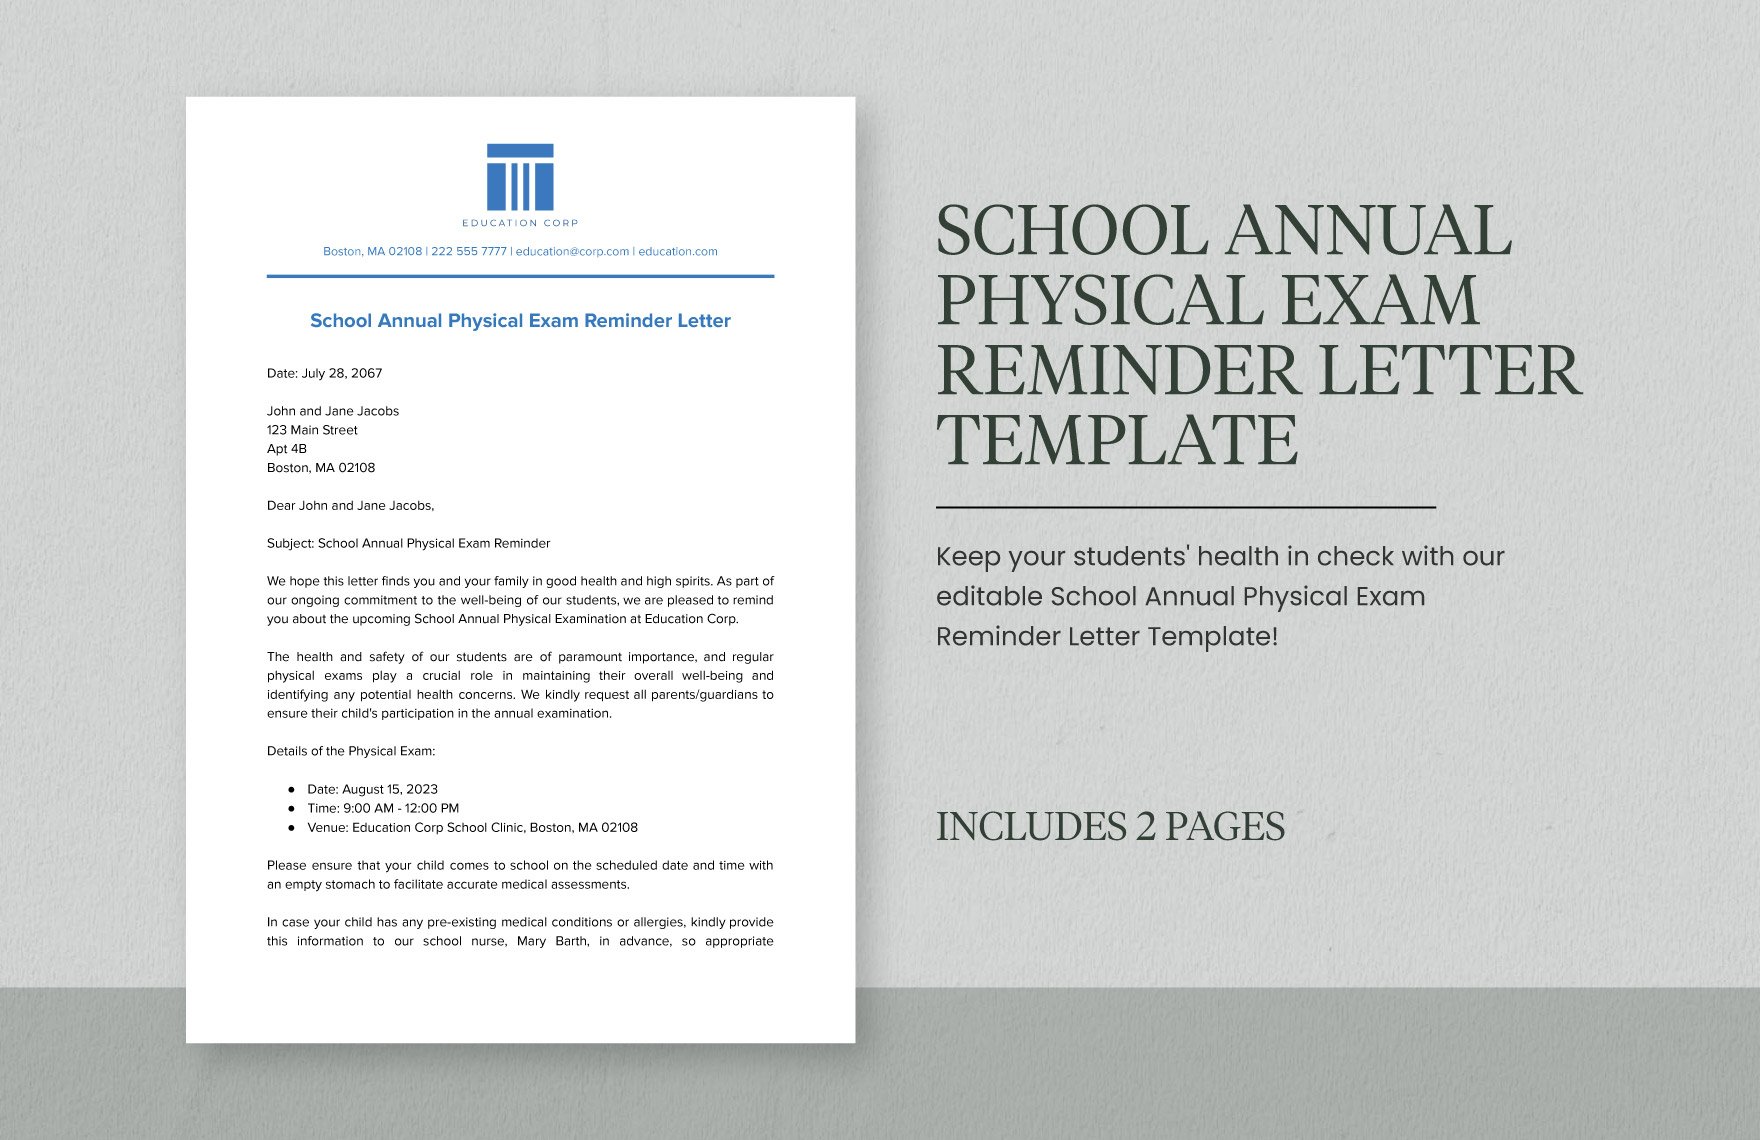 School Annual Physical Exam Reminder Letter Template